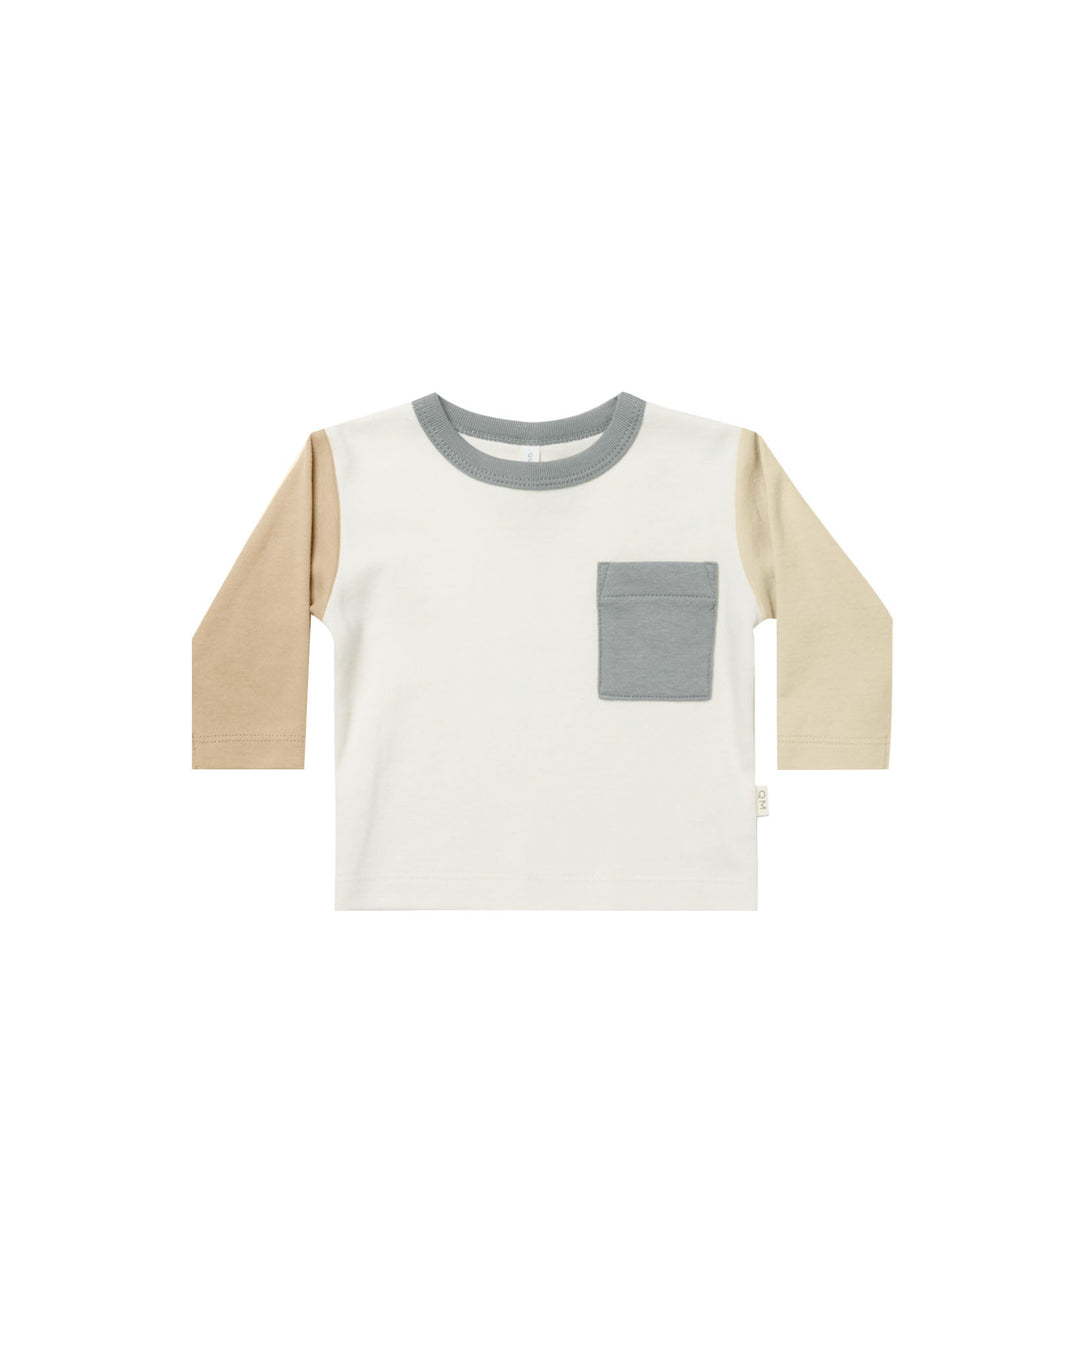 Quincy Mae Baby & Toddler Tops Long Sleeve Pocket Tee - Color Block